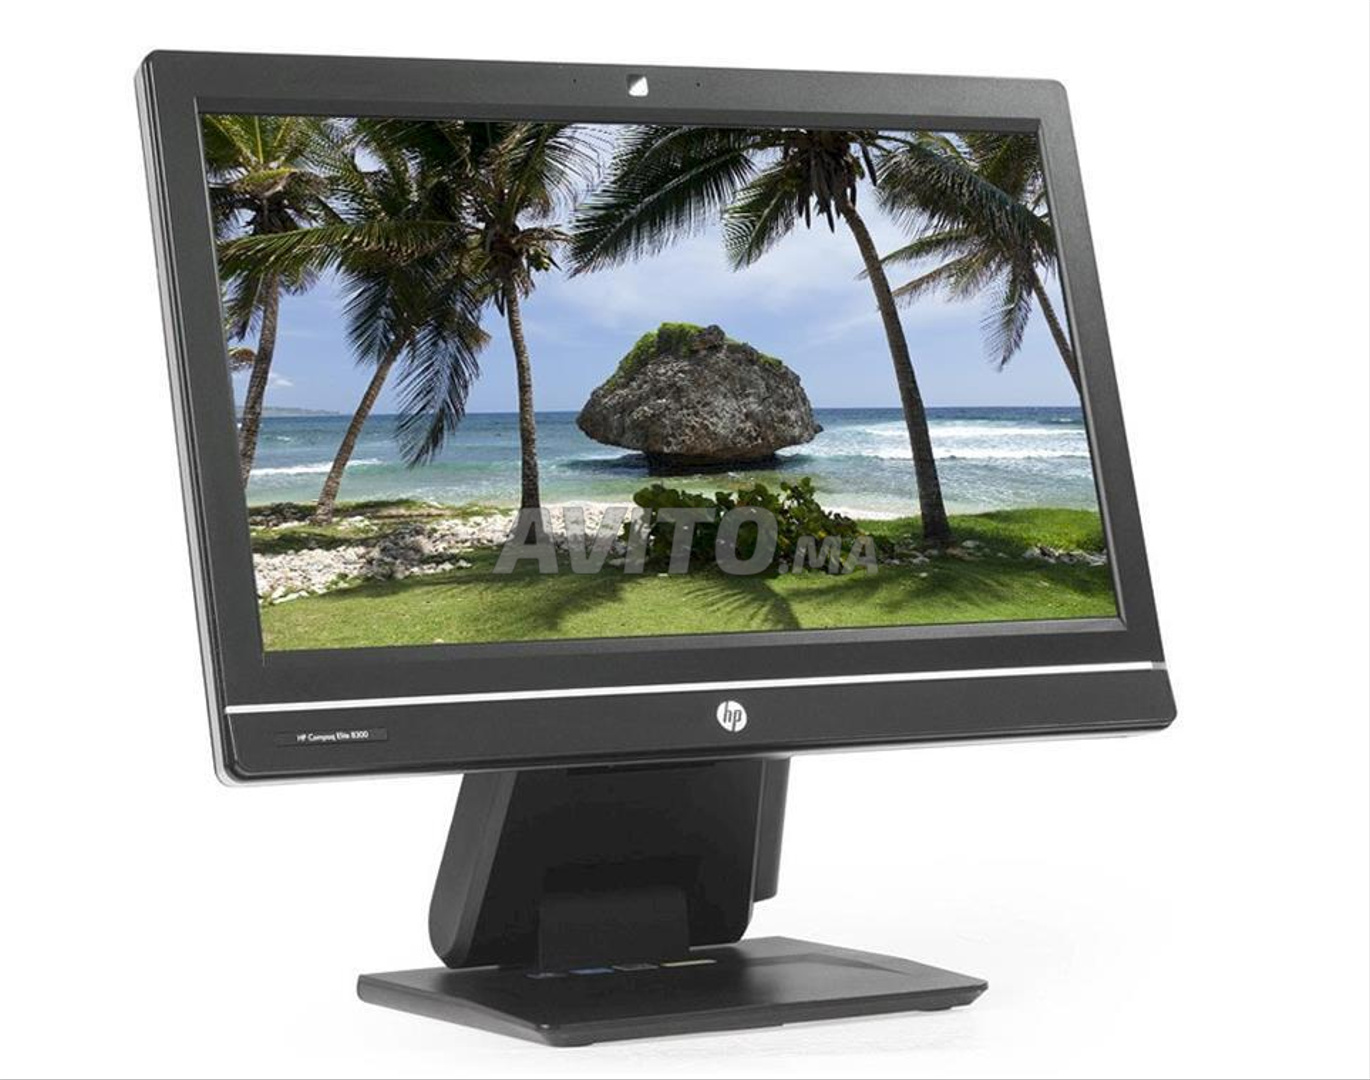 A NE PAS RATER PC HP AIO 8300  A BENMSIK - 5